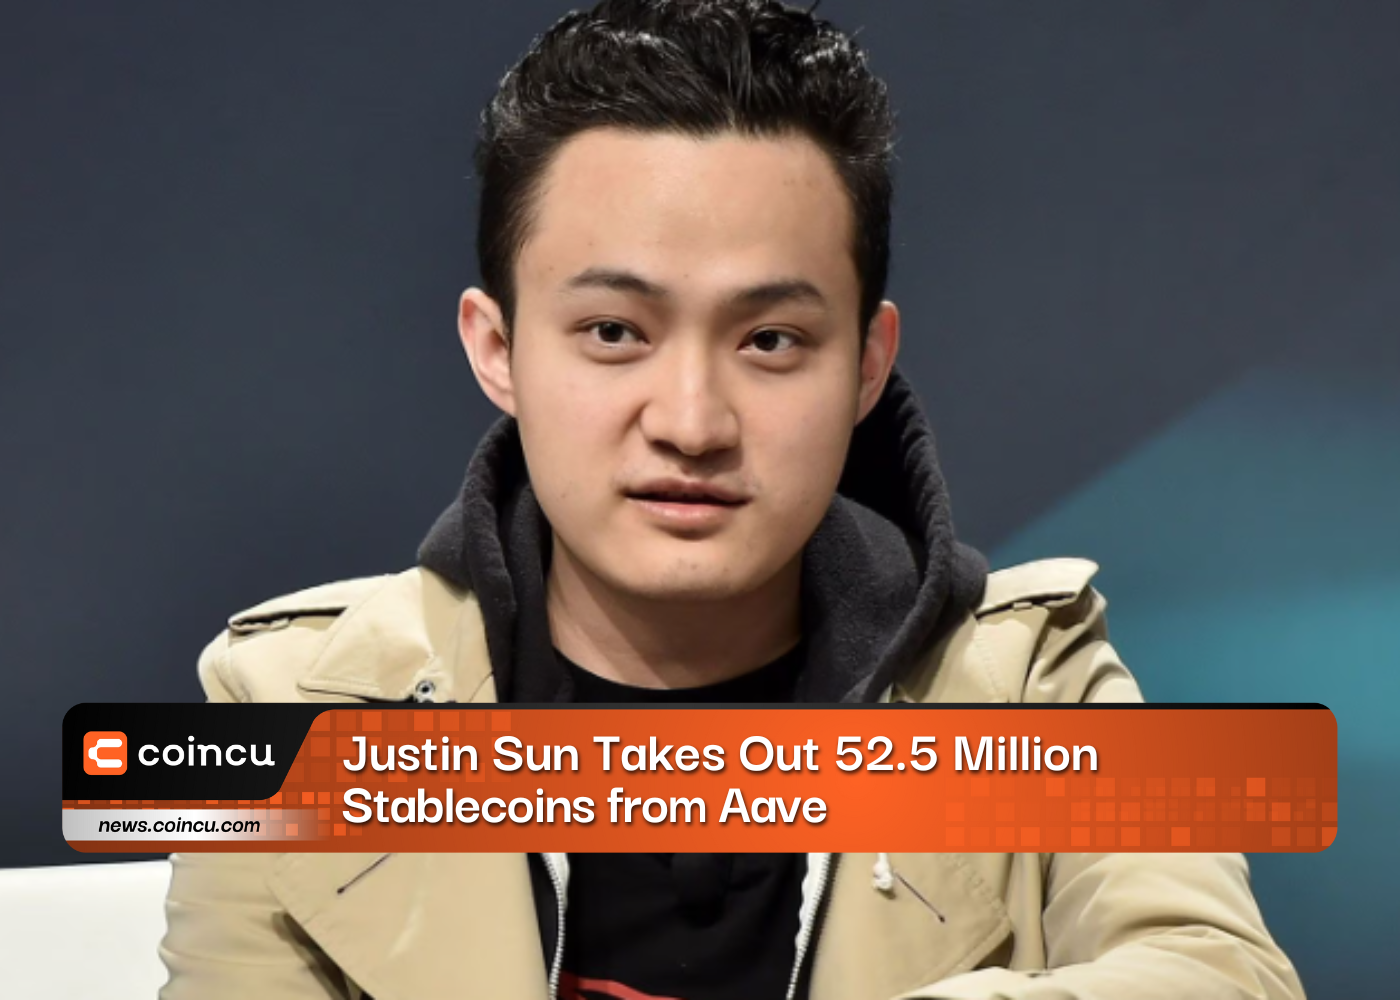 Justin Sun Takes Out 52.5 Million Stablecoins